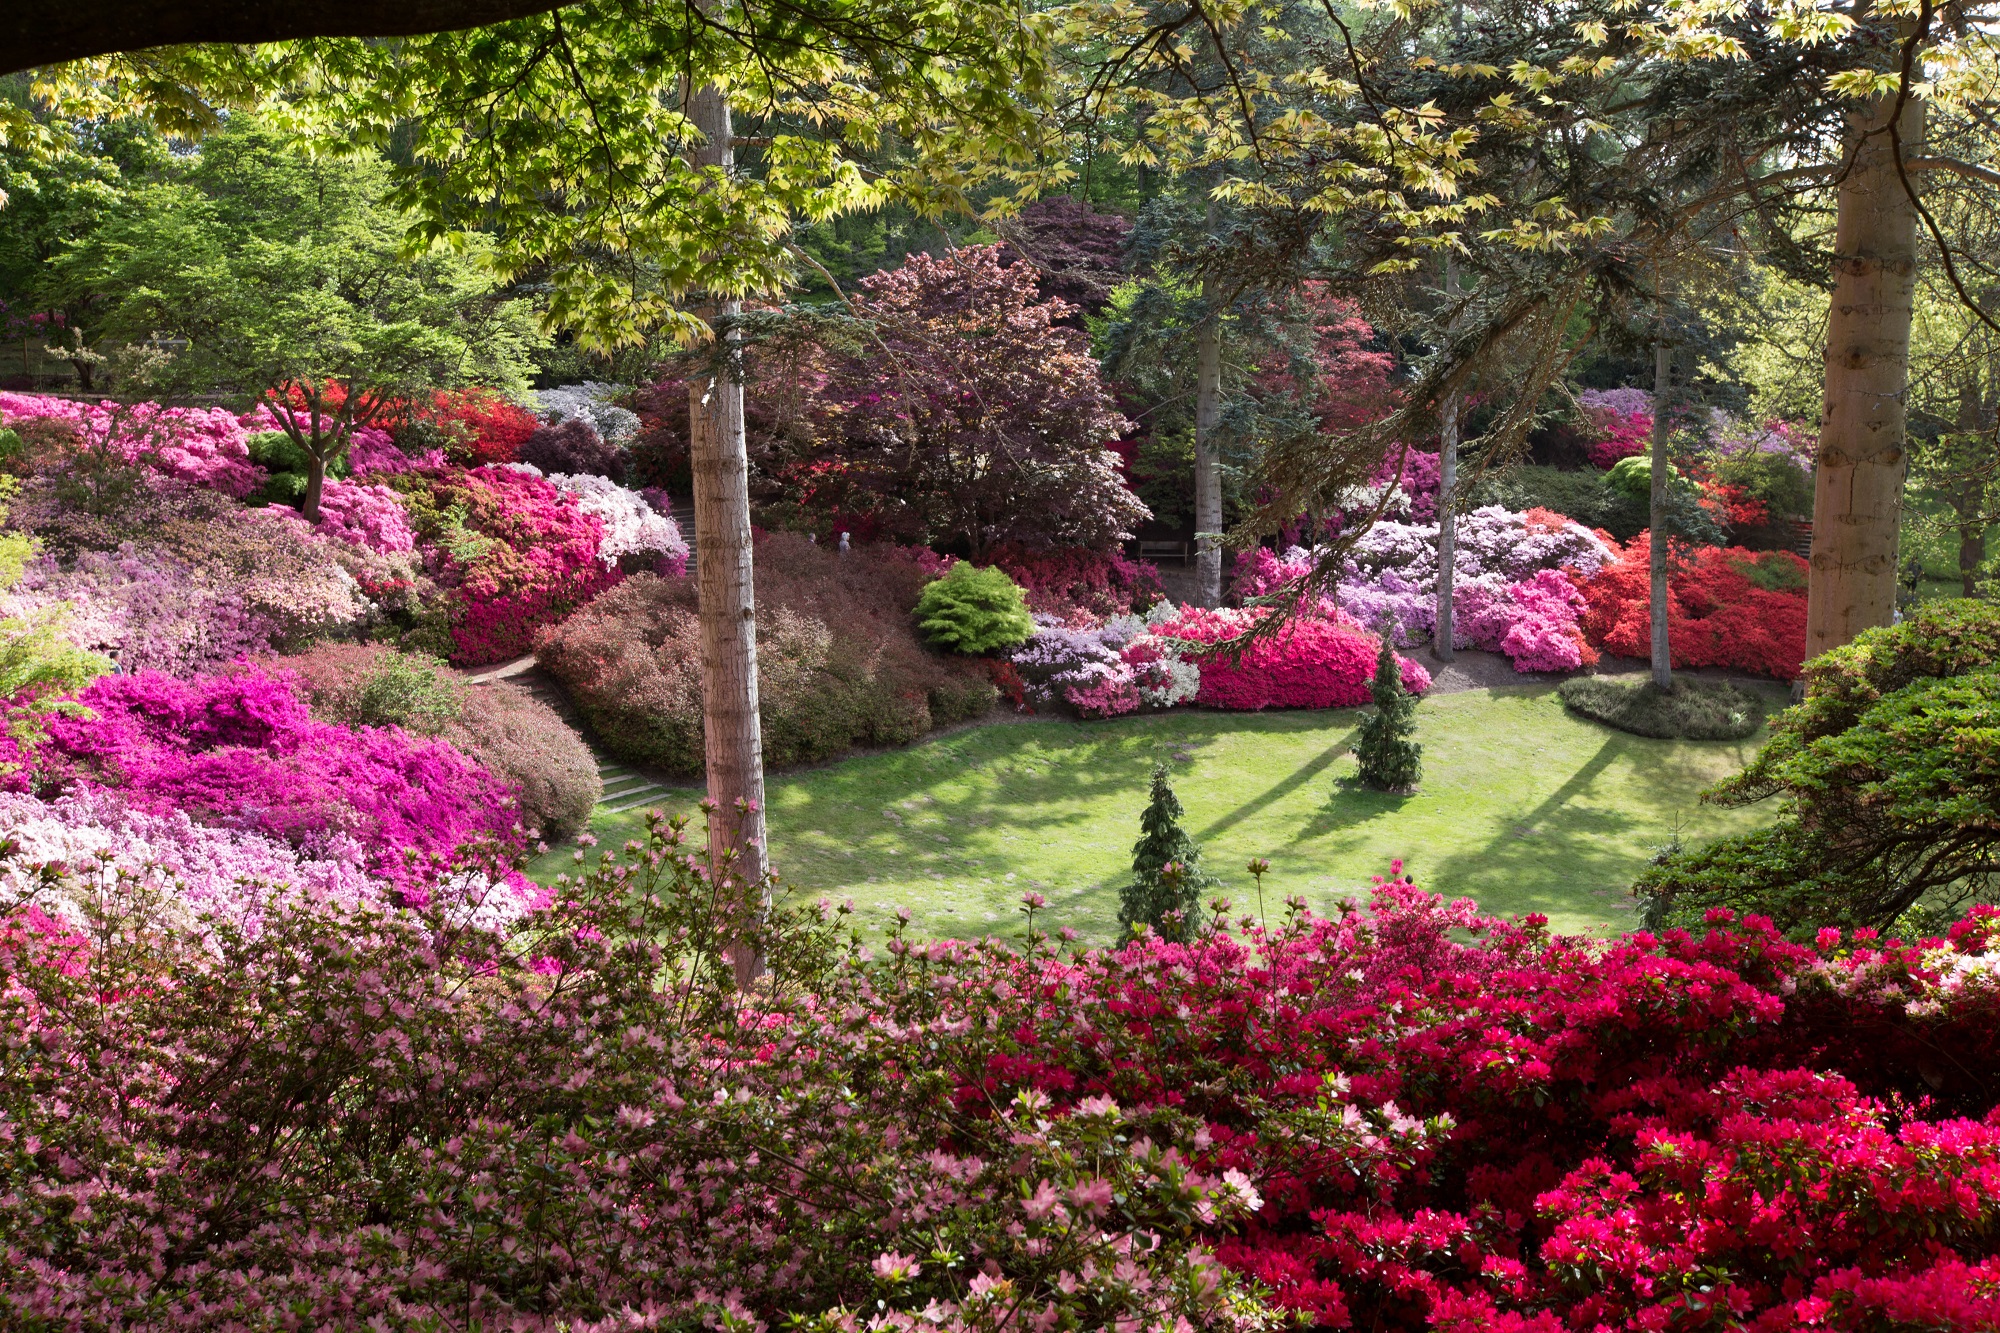 The Valley Gardens Punch Bowl surrounded by flowering shrubbery